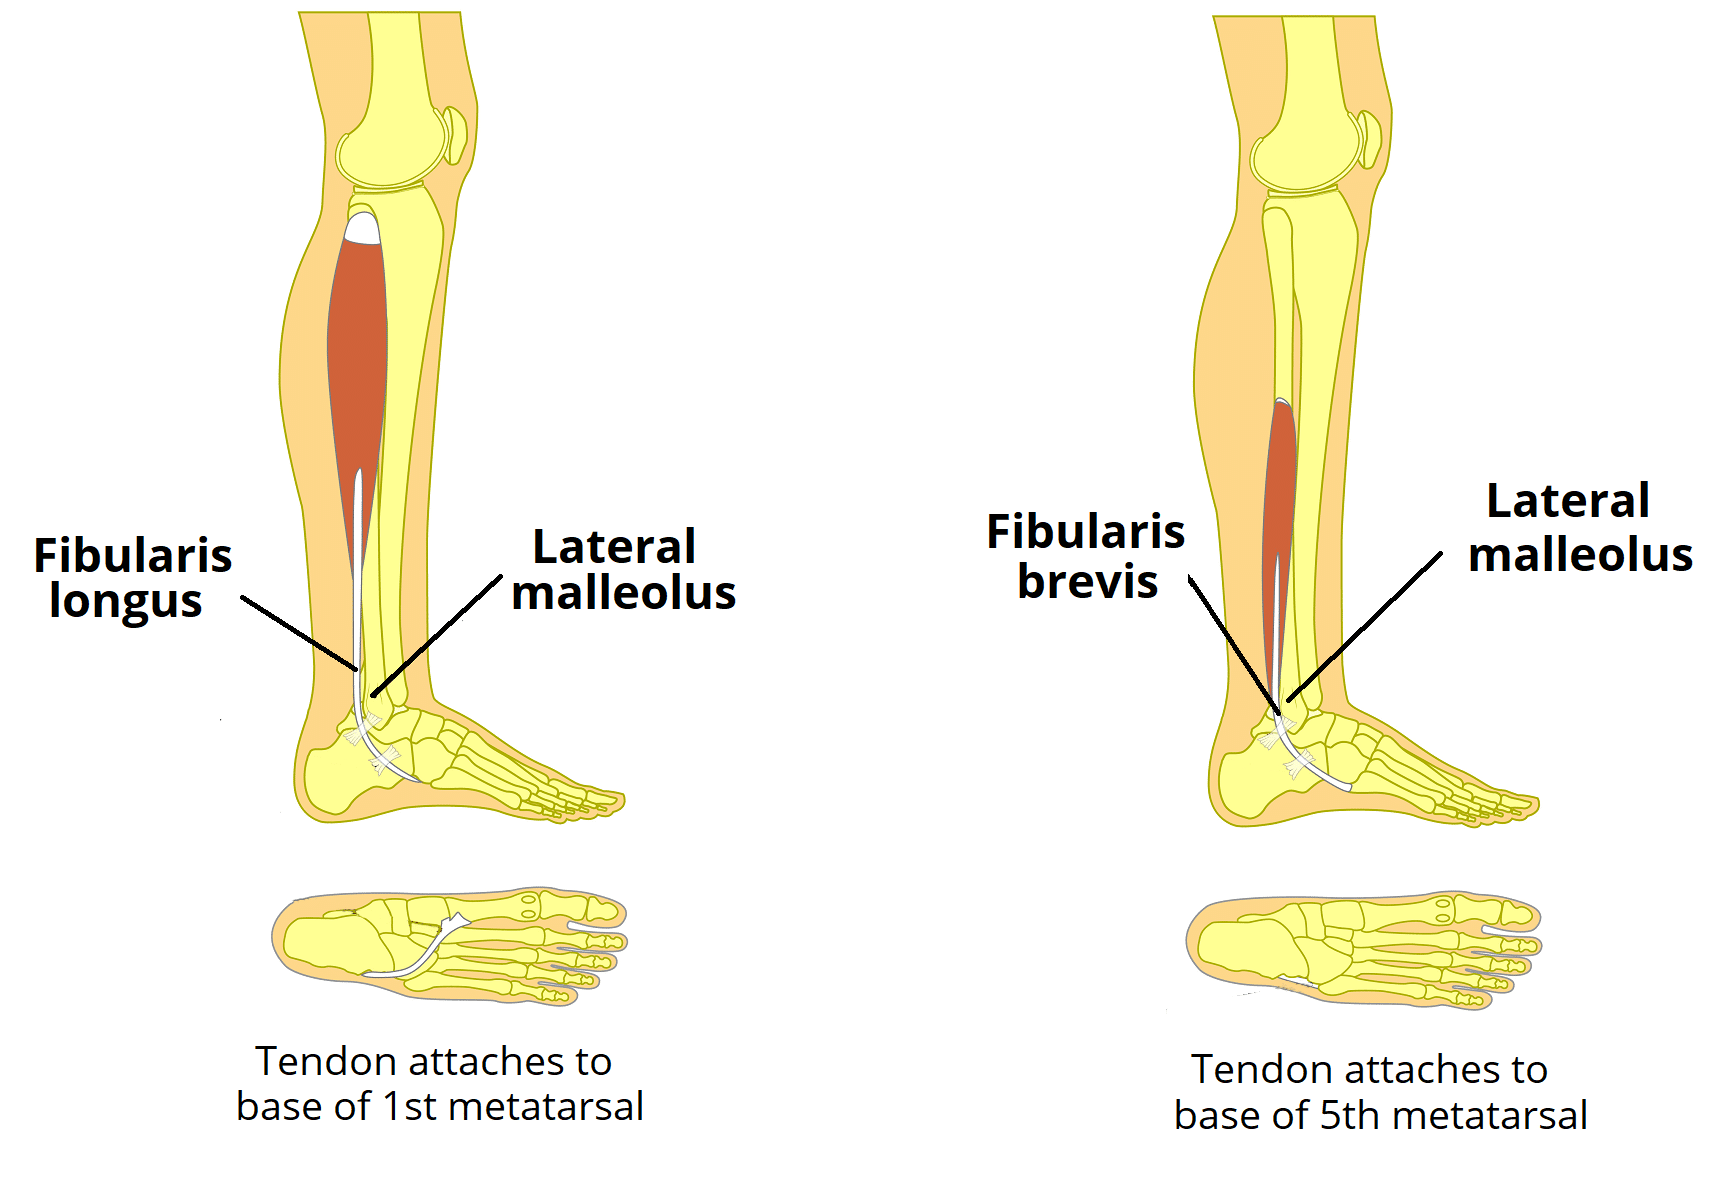 inversion of foot muscles